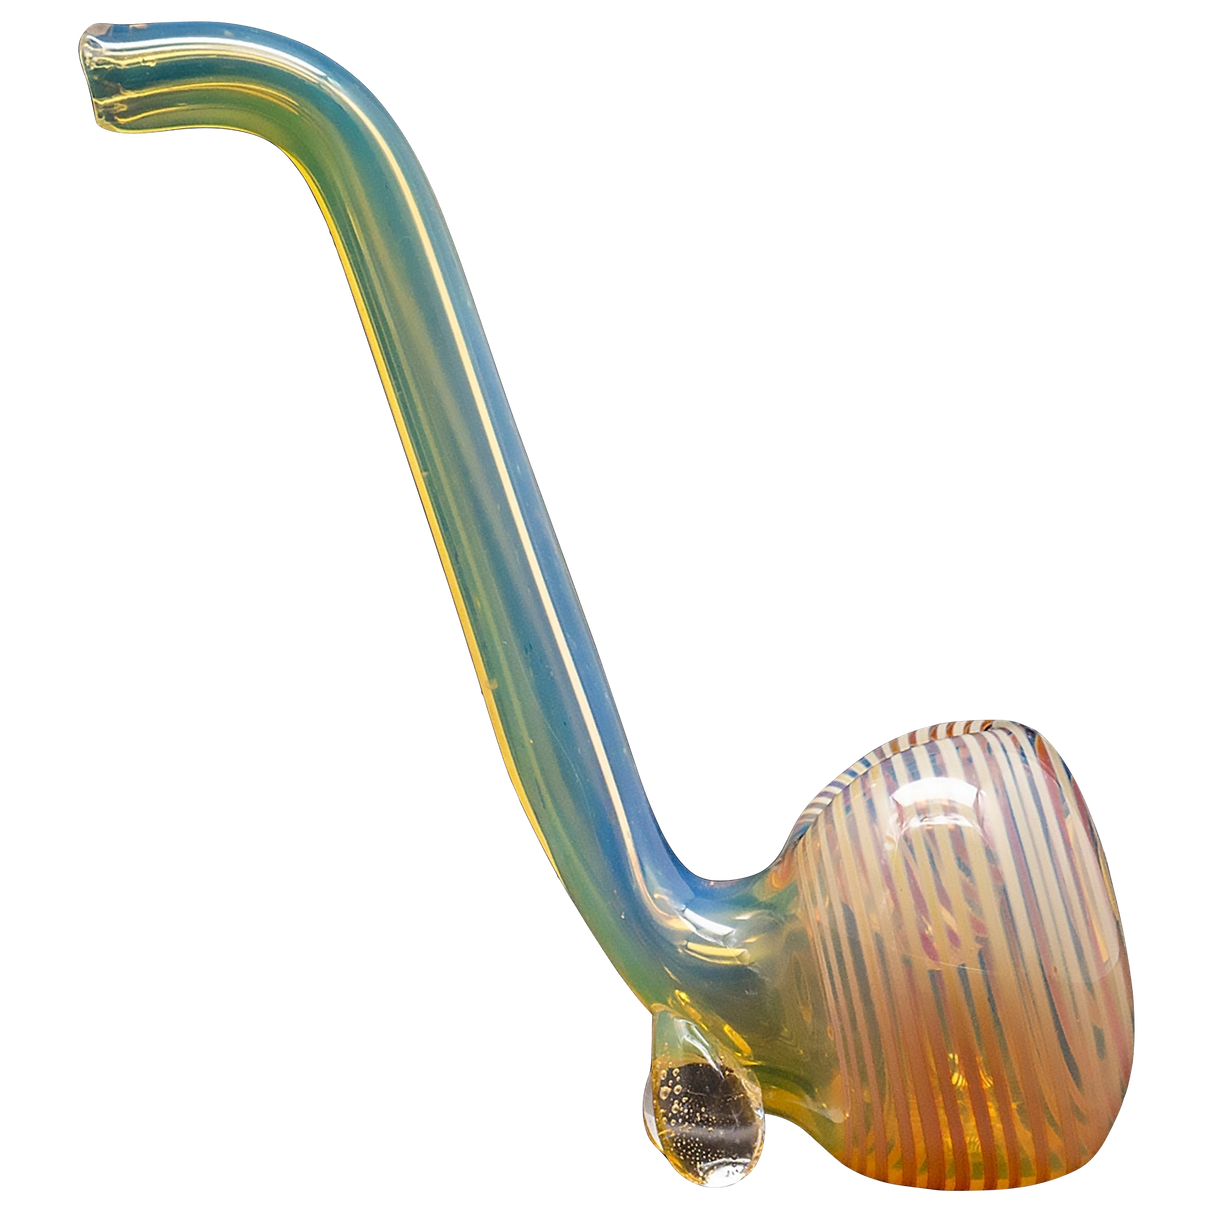 LA Pipes Spoon Hand Pipe in Borosilicate Glass with Striped Design - Side View